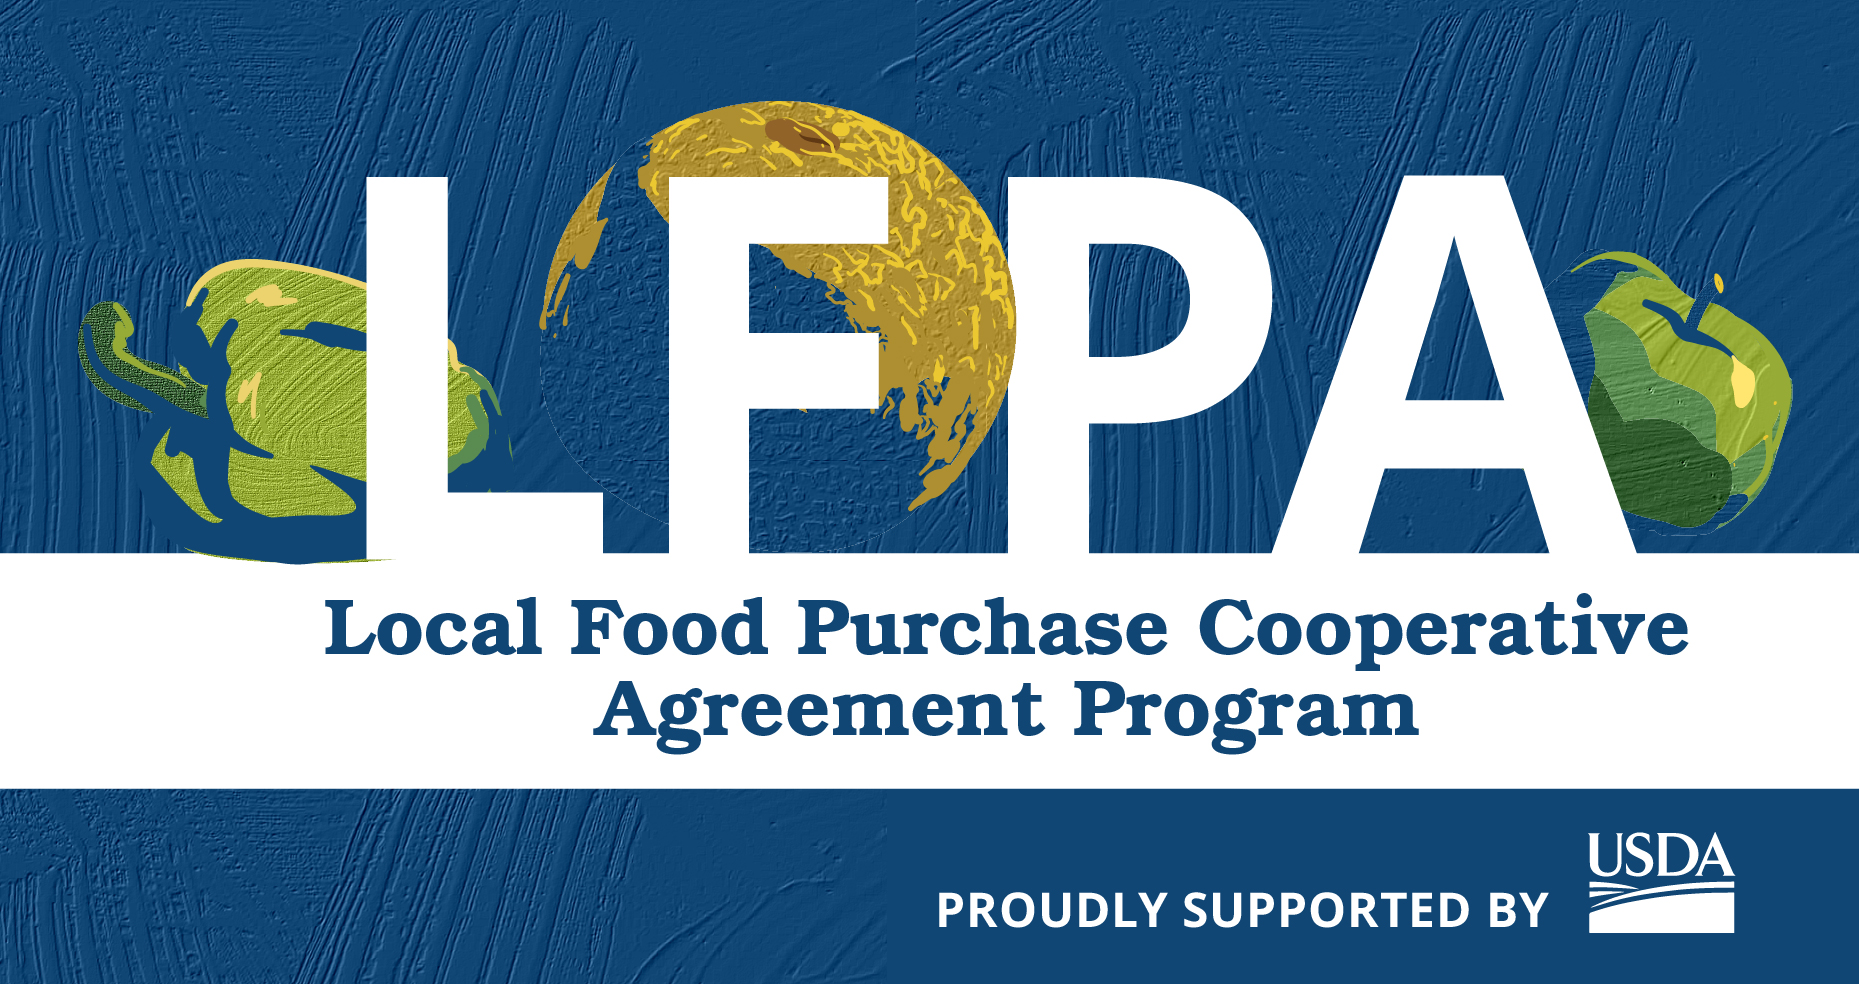 Image you can add to your texts to promote the LFPA Program